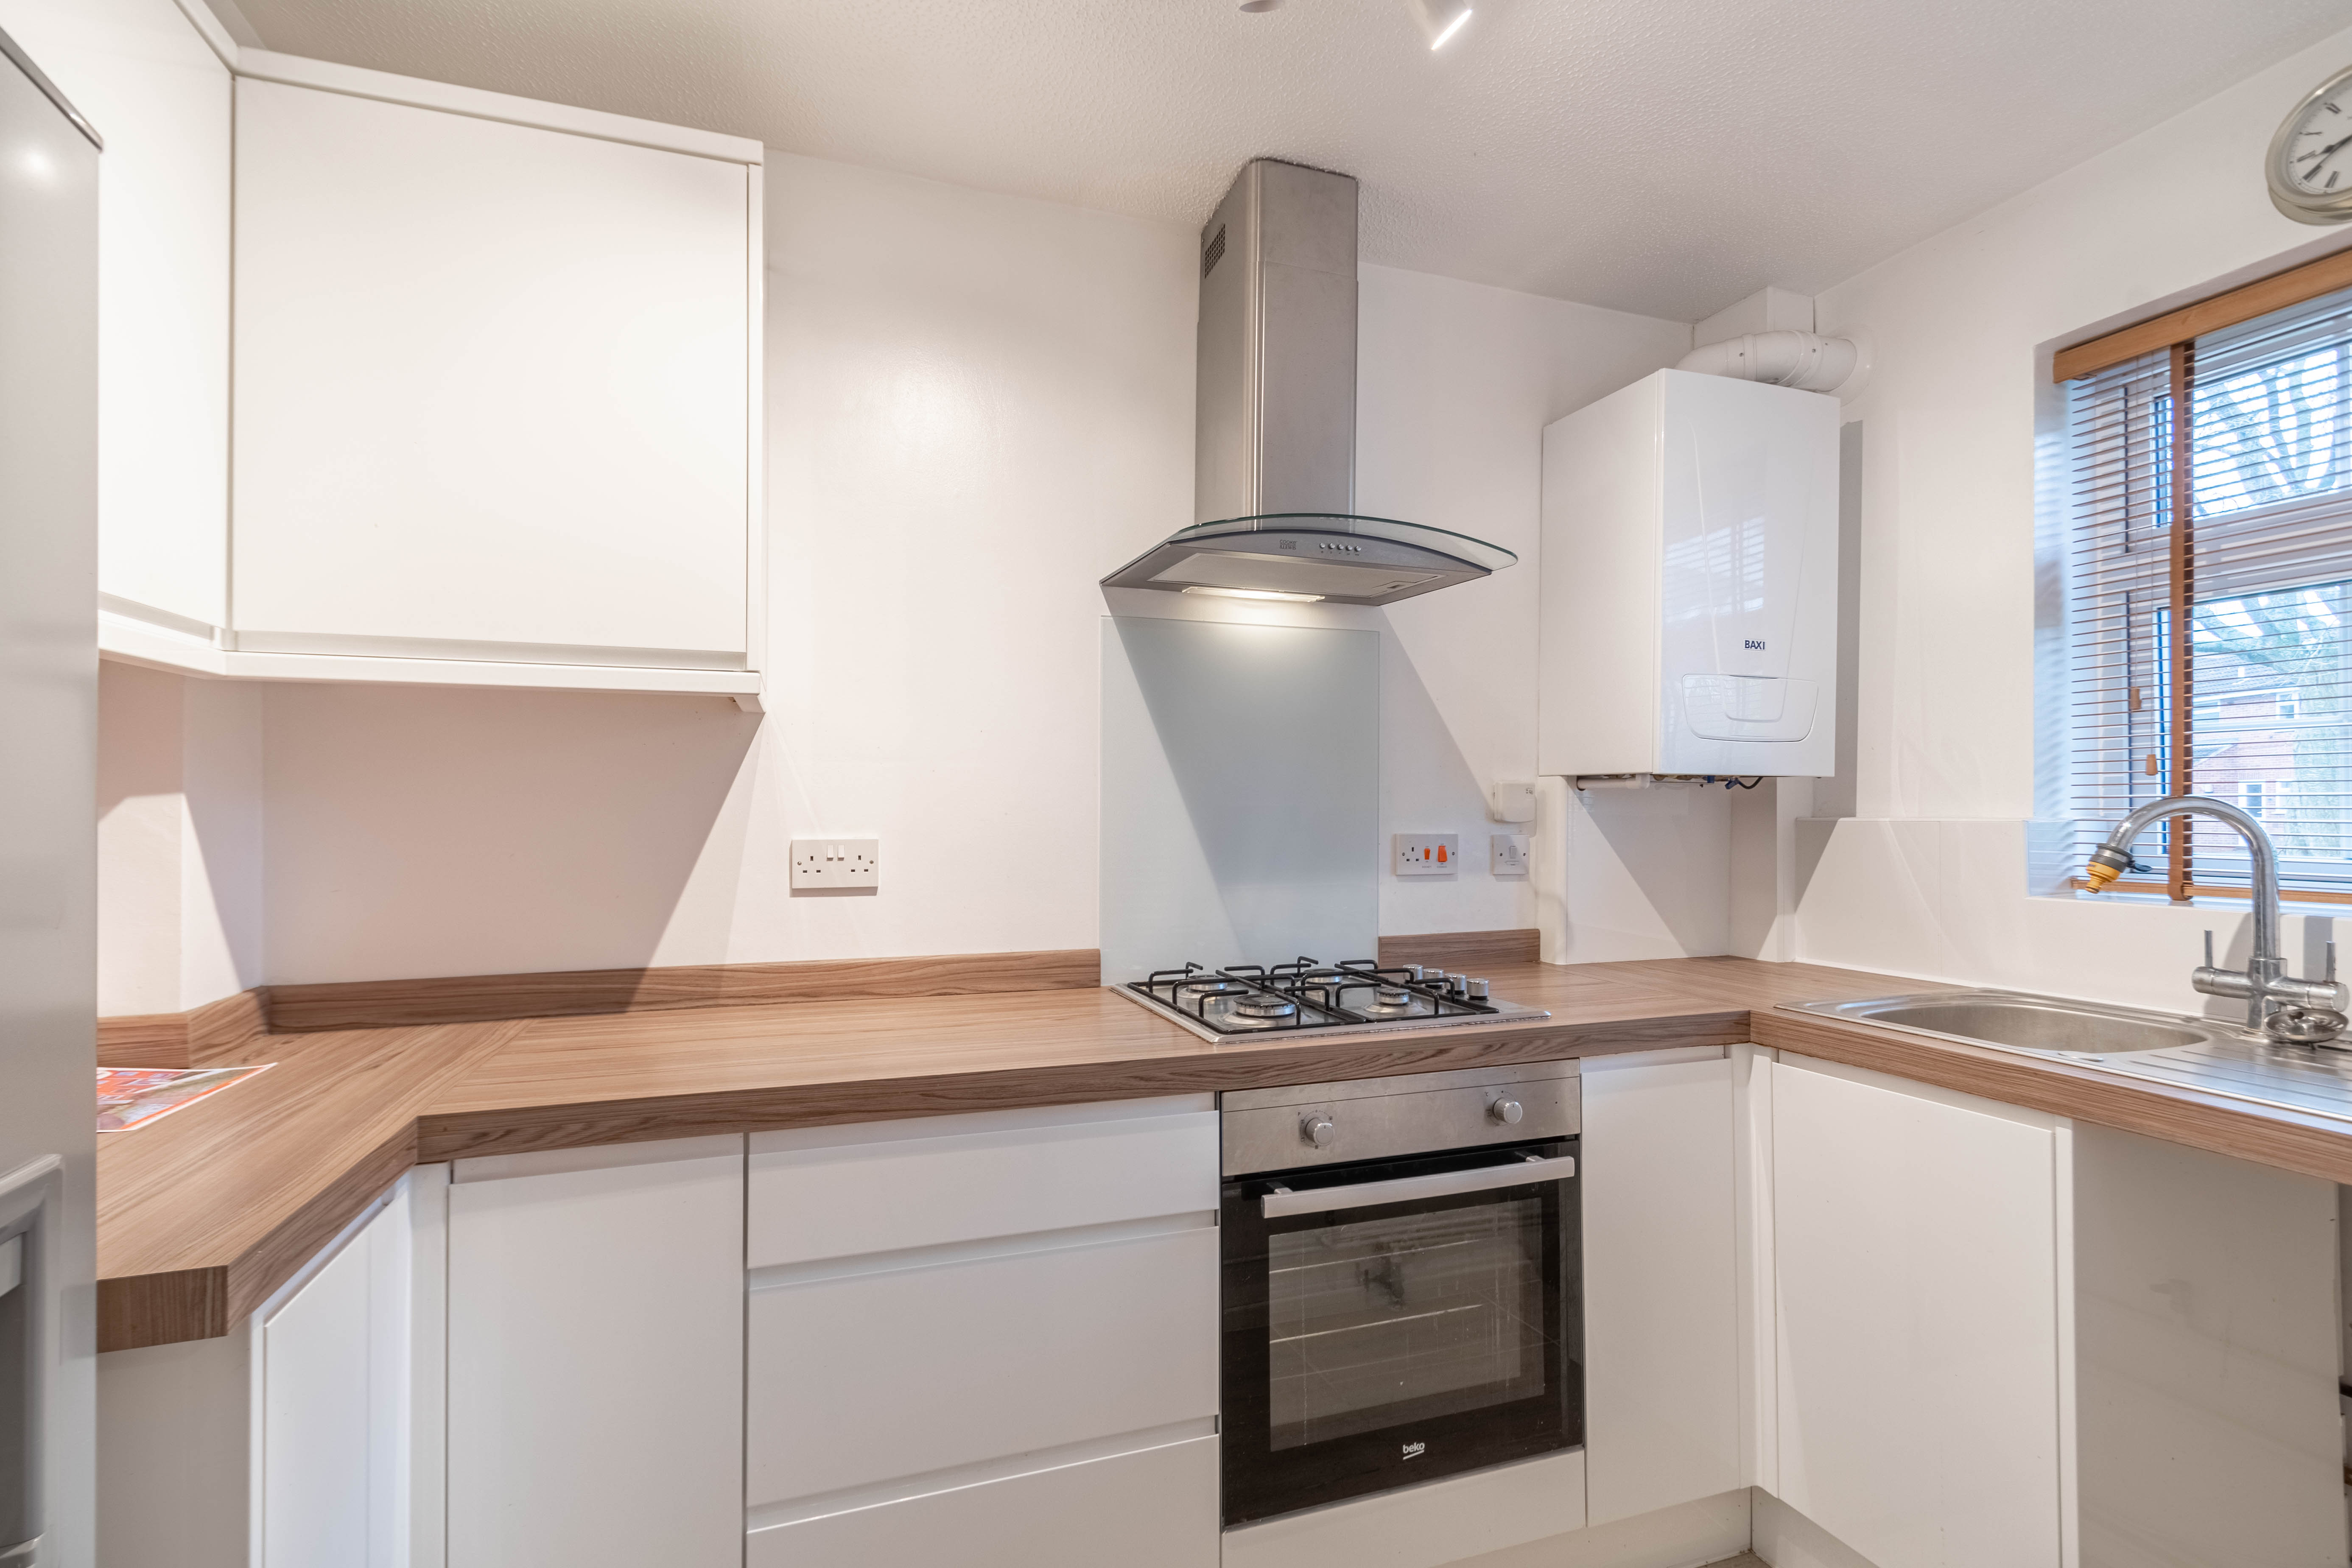 2 bed house for sale in Abbotswood Close, Winyates Green 14